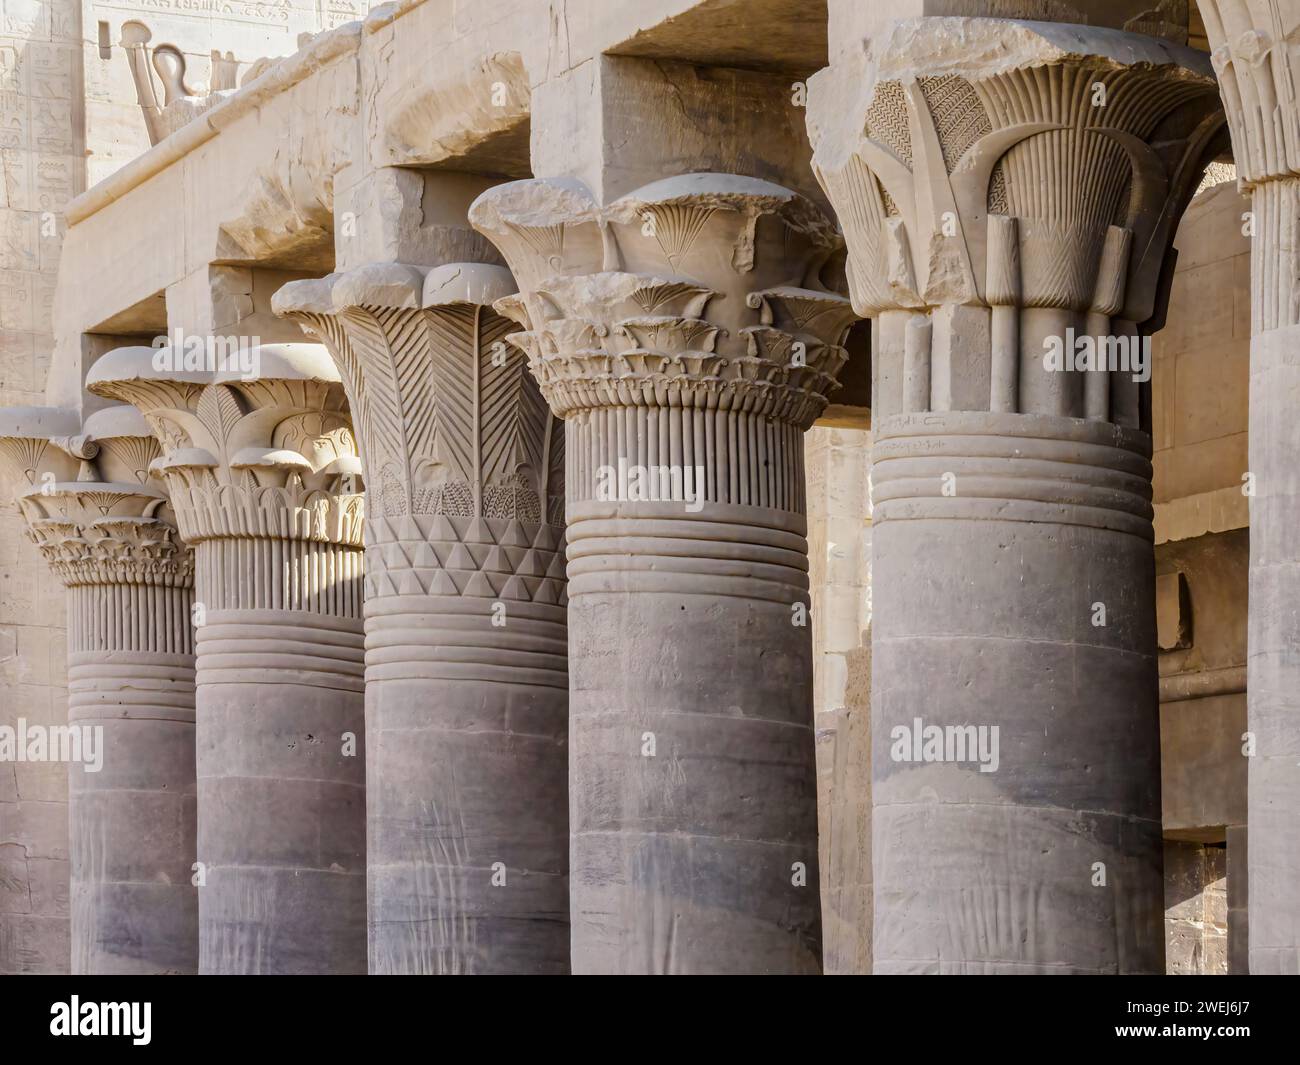 Columns at the Philae temple complex, The Temple of Isis, currently on the island of Agilkia, Egypt. Stock Photo